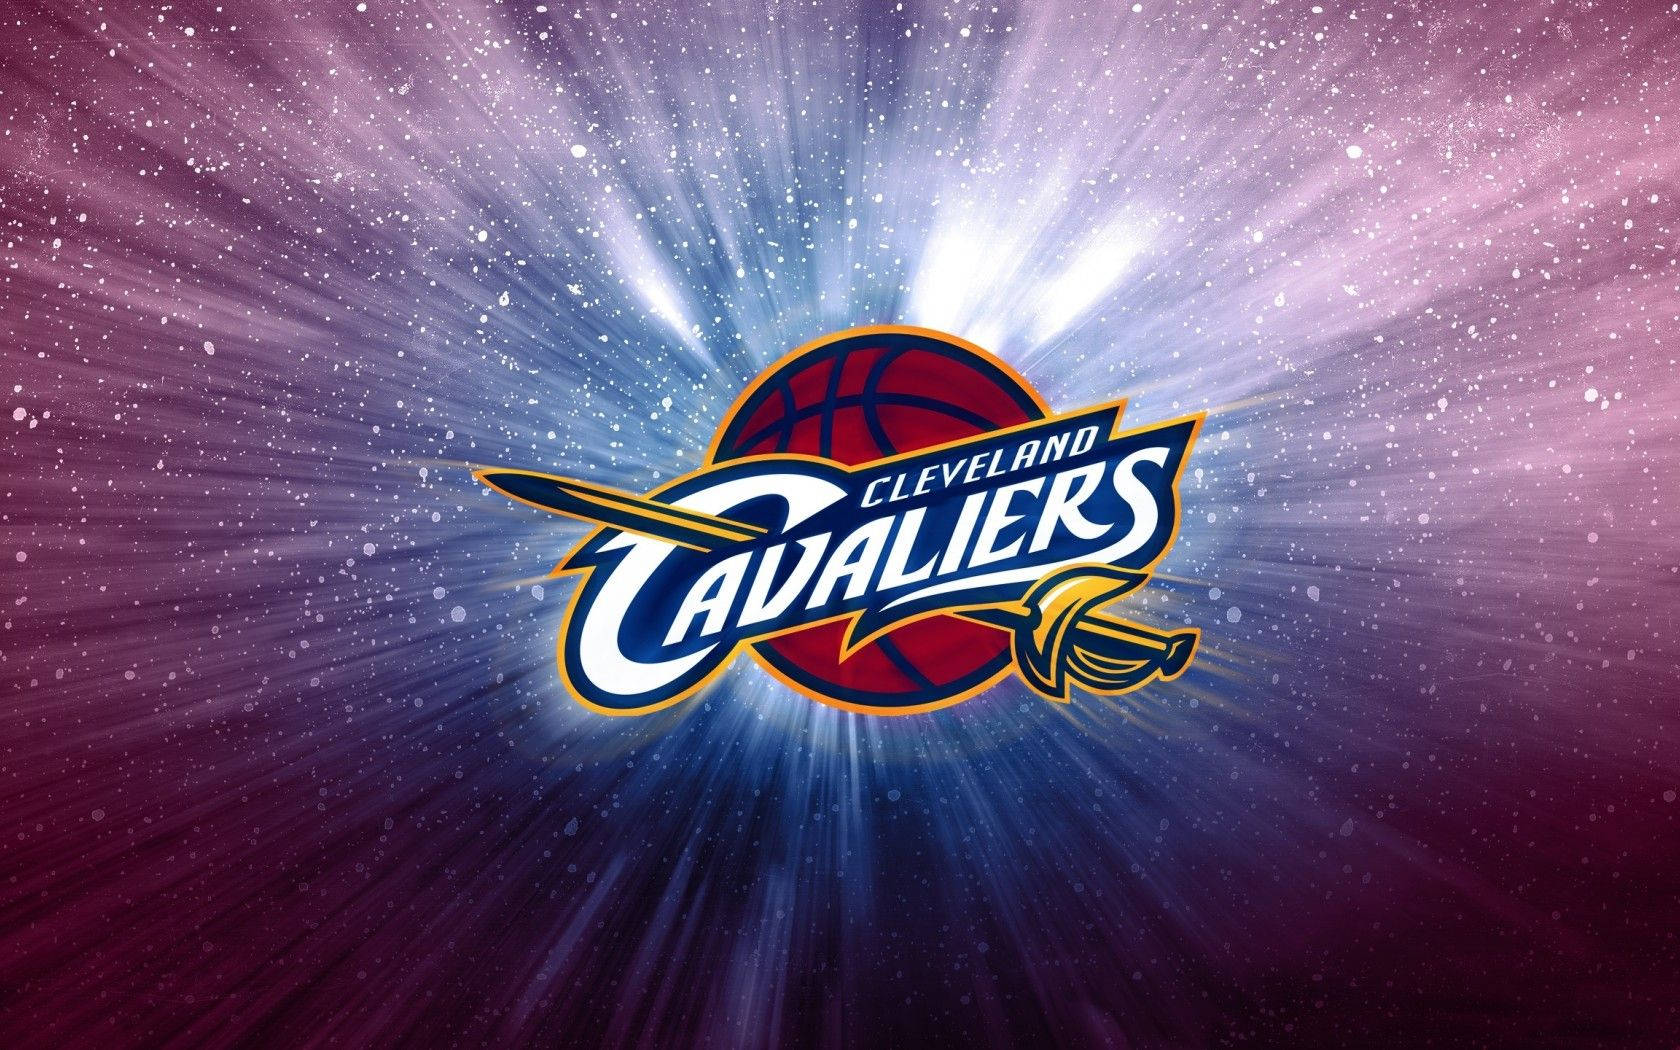 Show Your Fight For The Land With The Cleveland Cavaliers Wallpaper